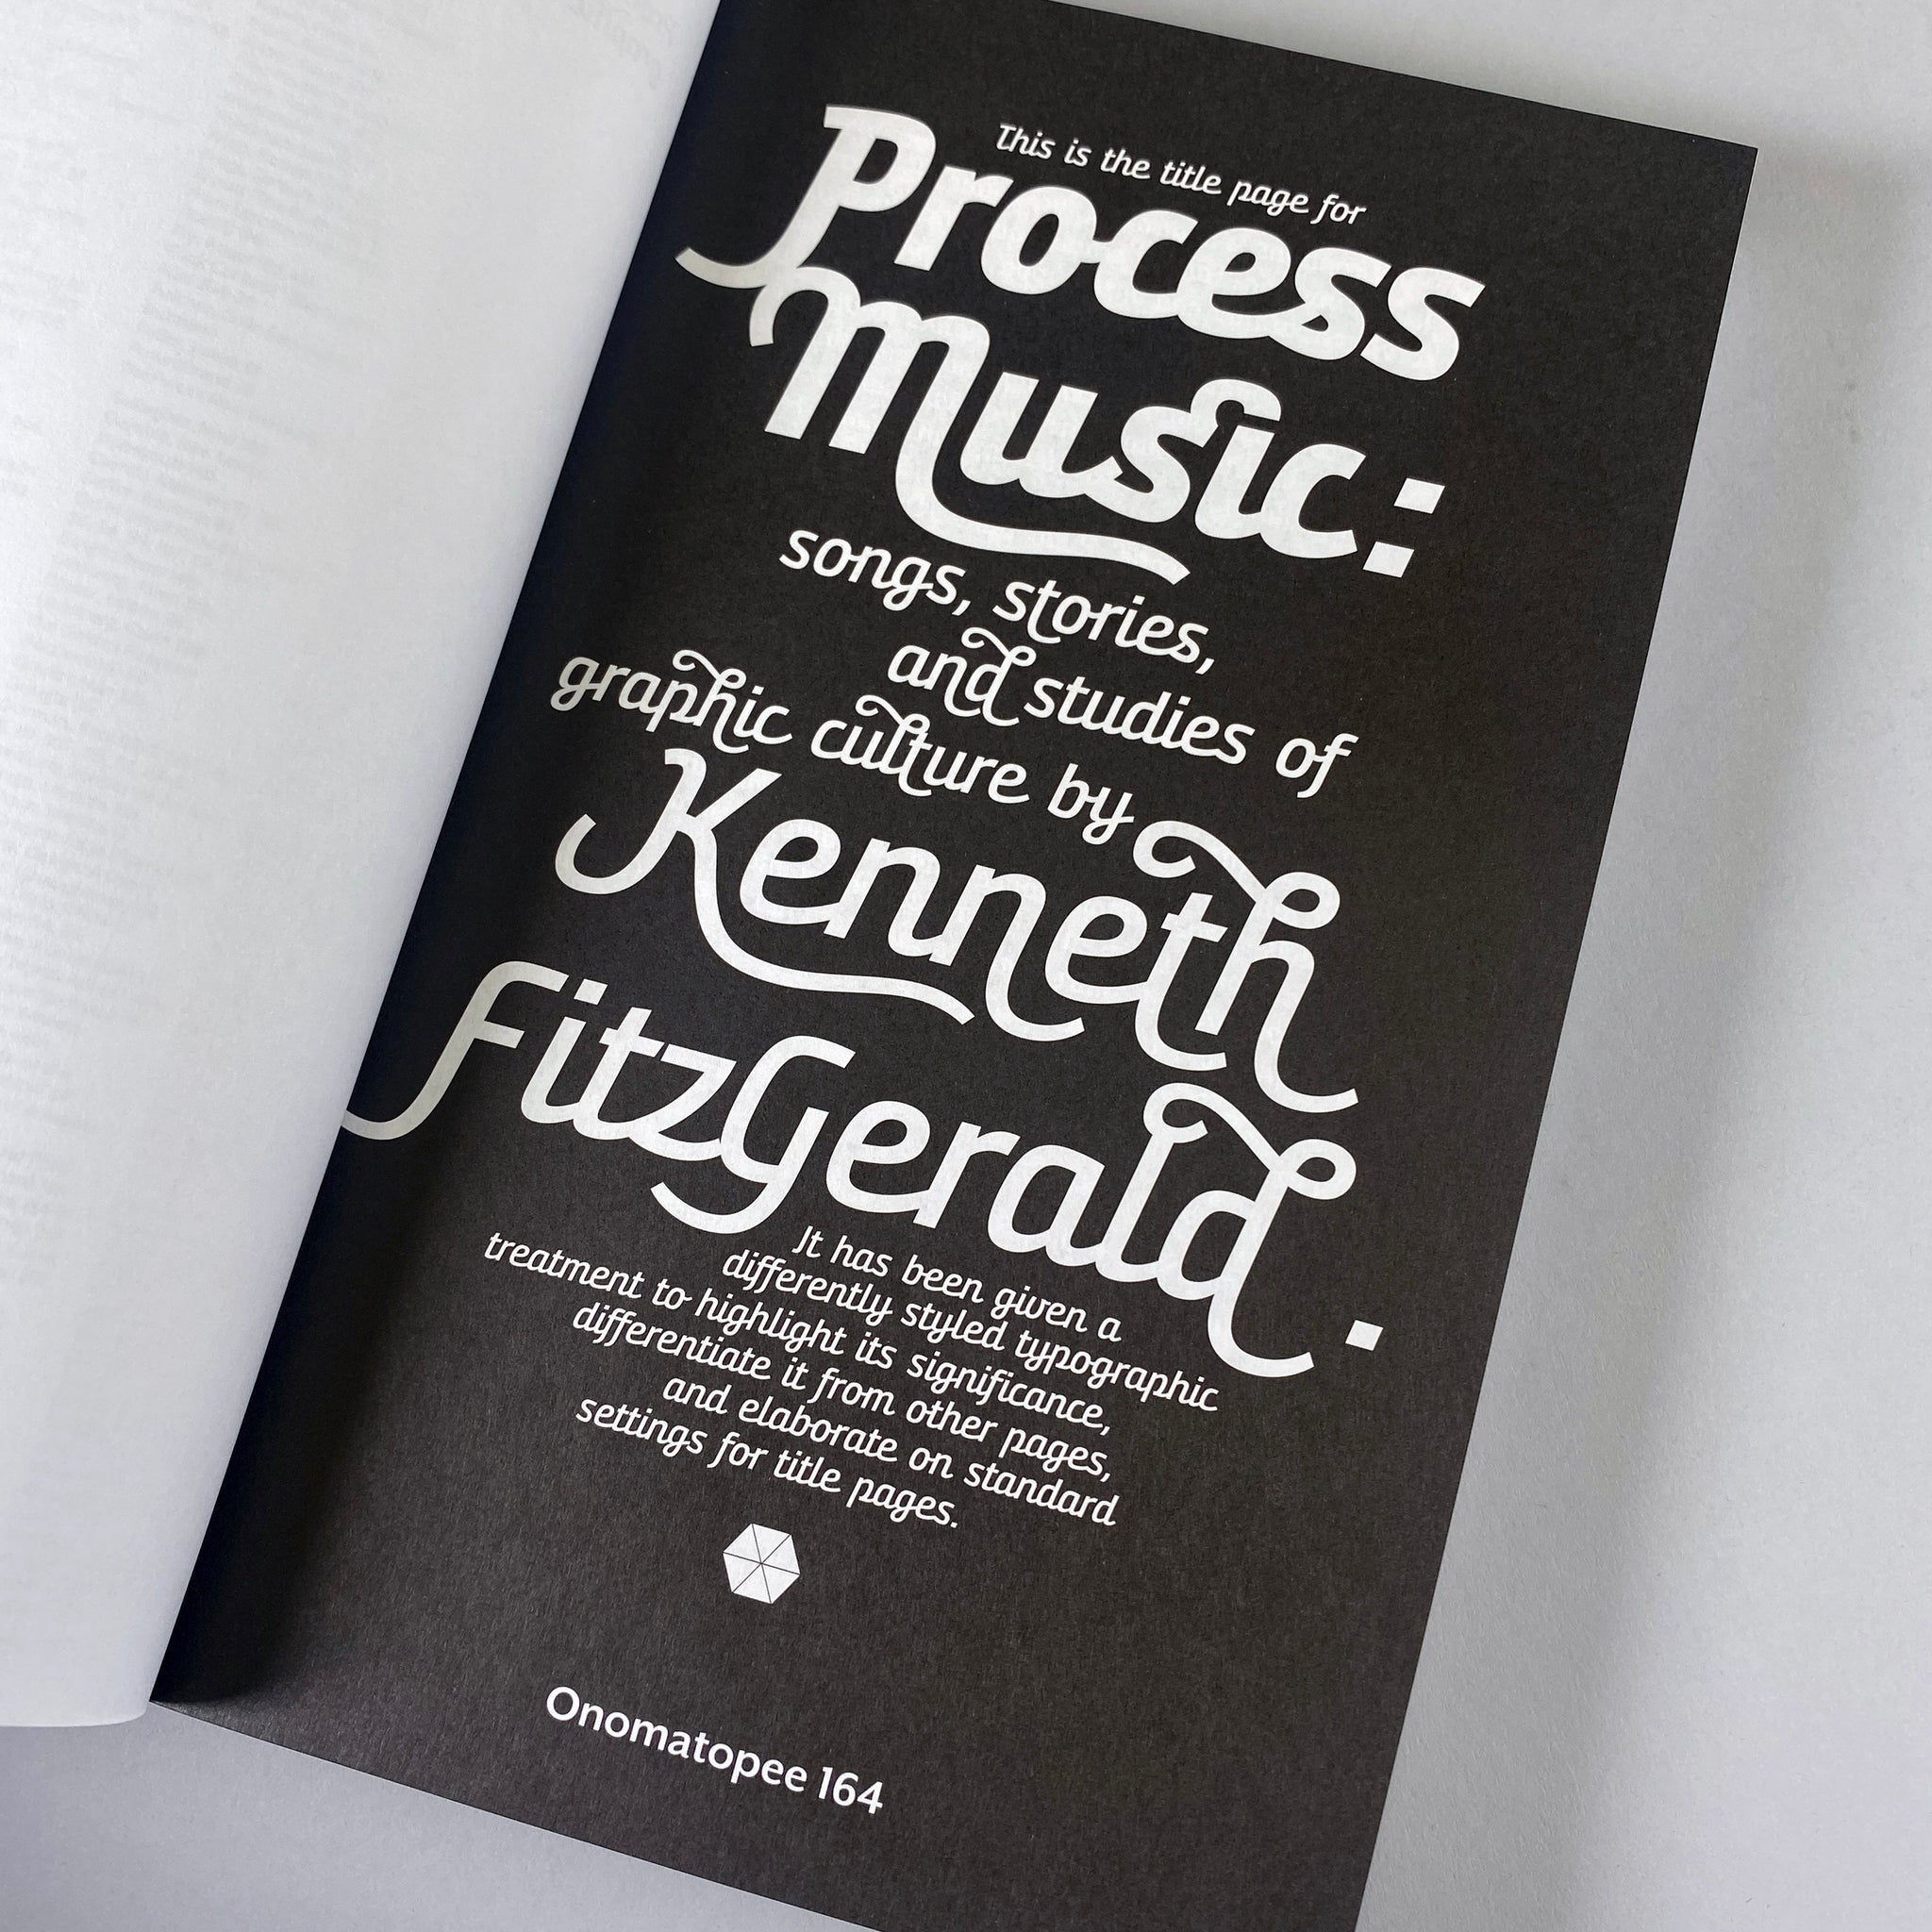 Process Music: Songs, Stories, and Studies of Graphic Culture